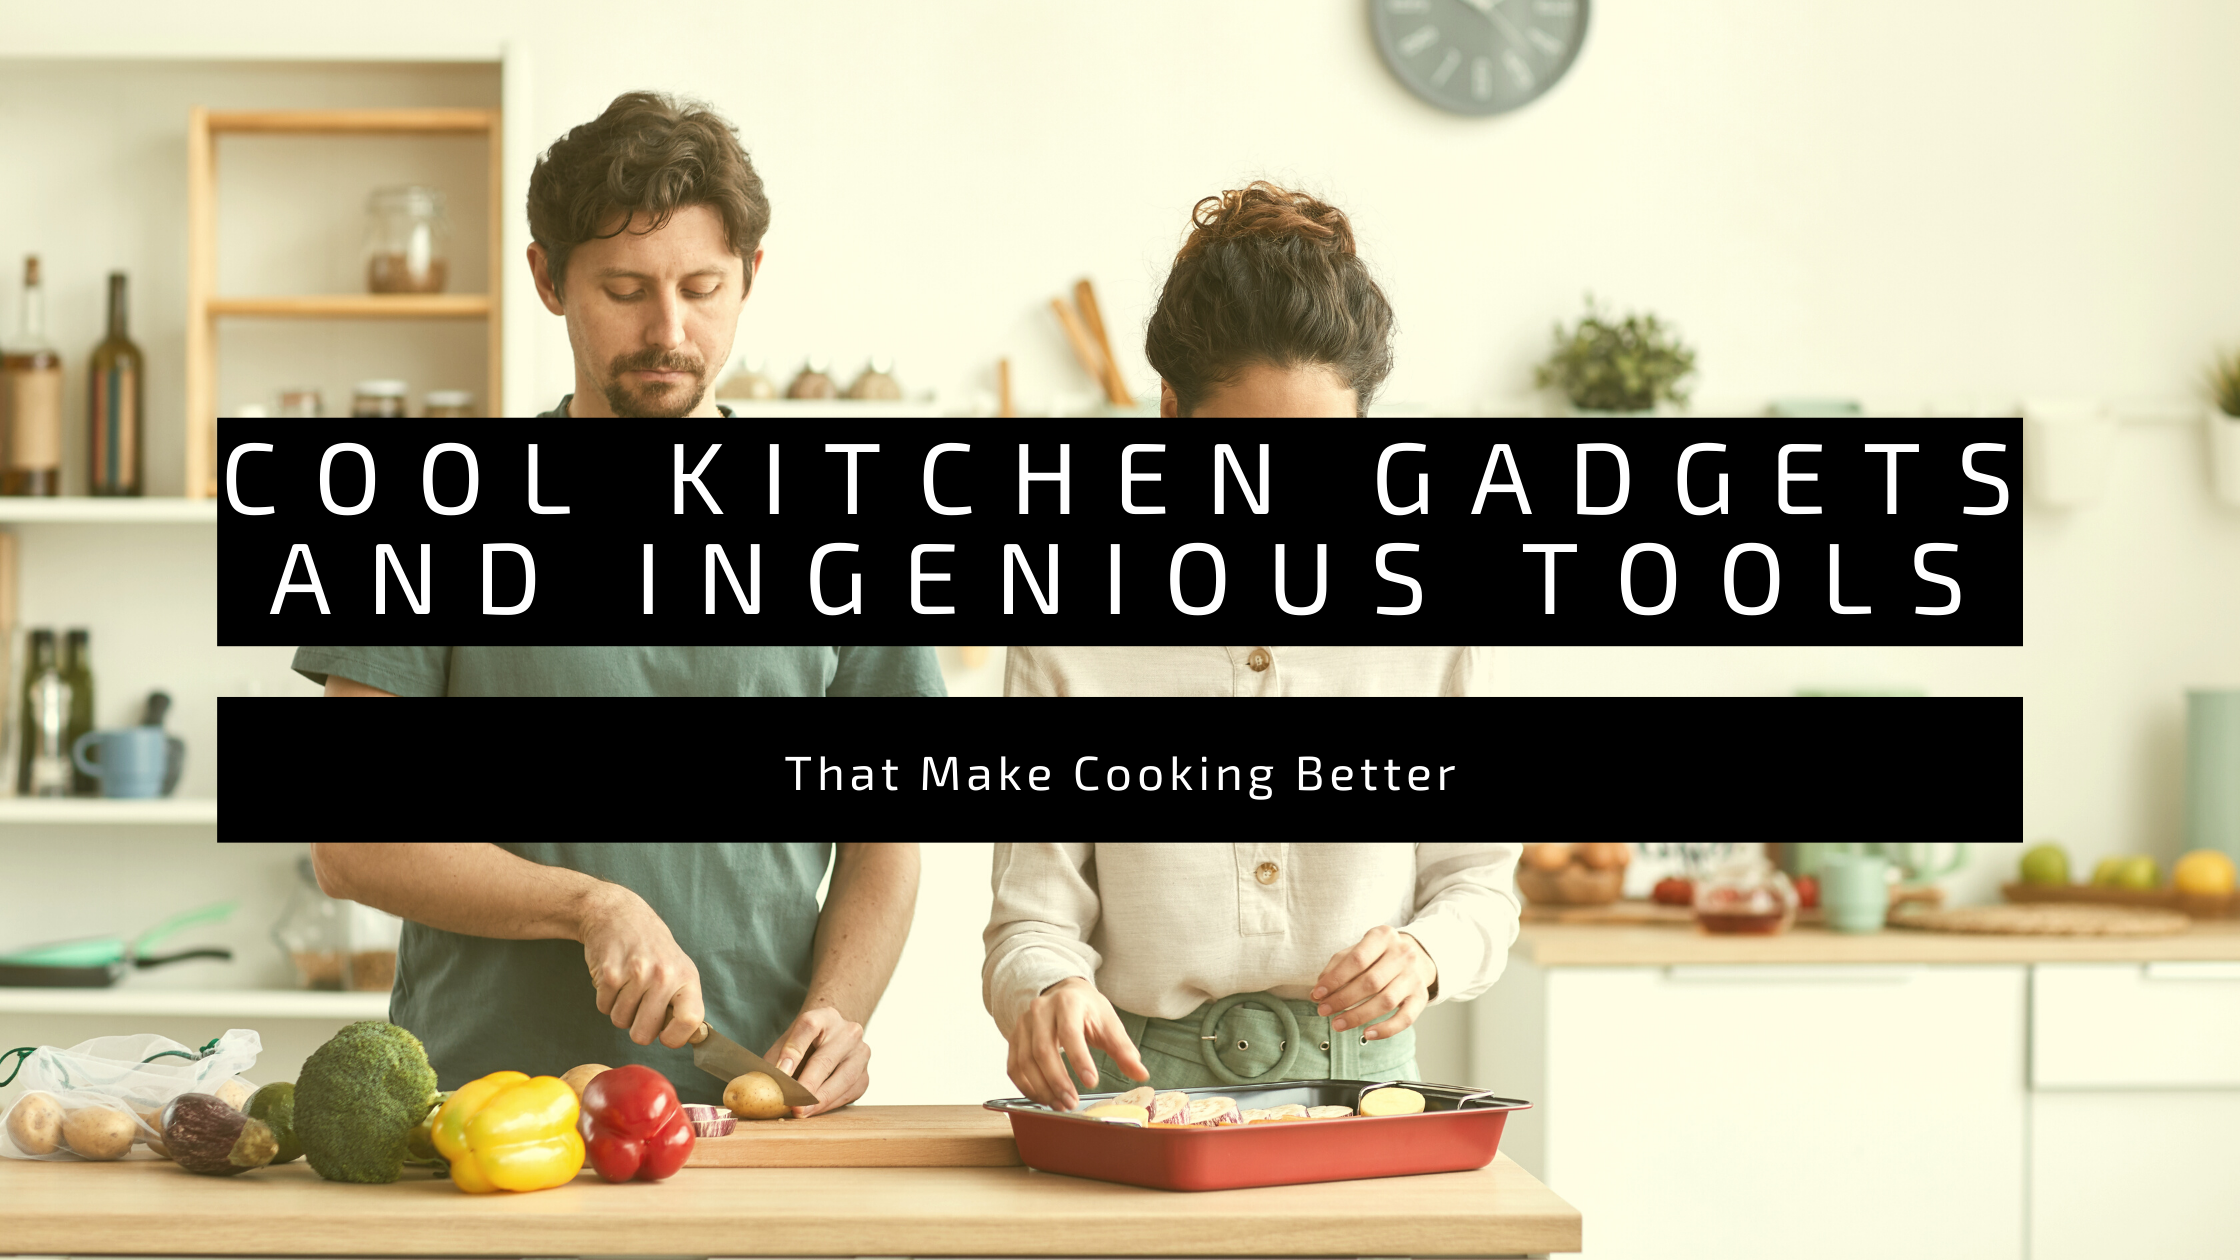 Cool Kitchen Gadgets and Ingenious Tools